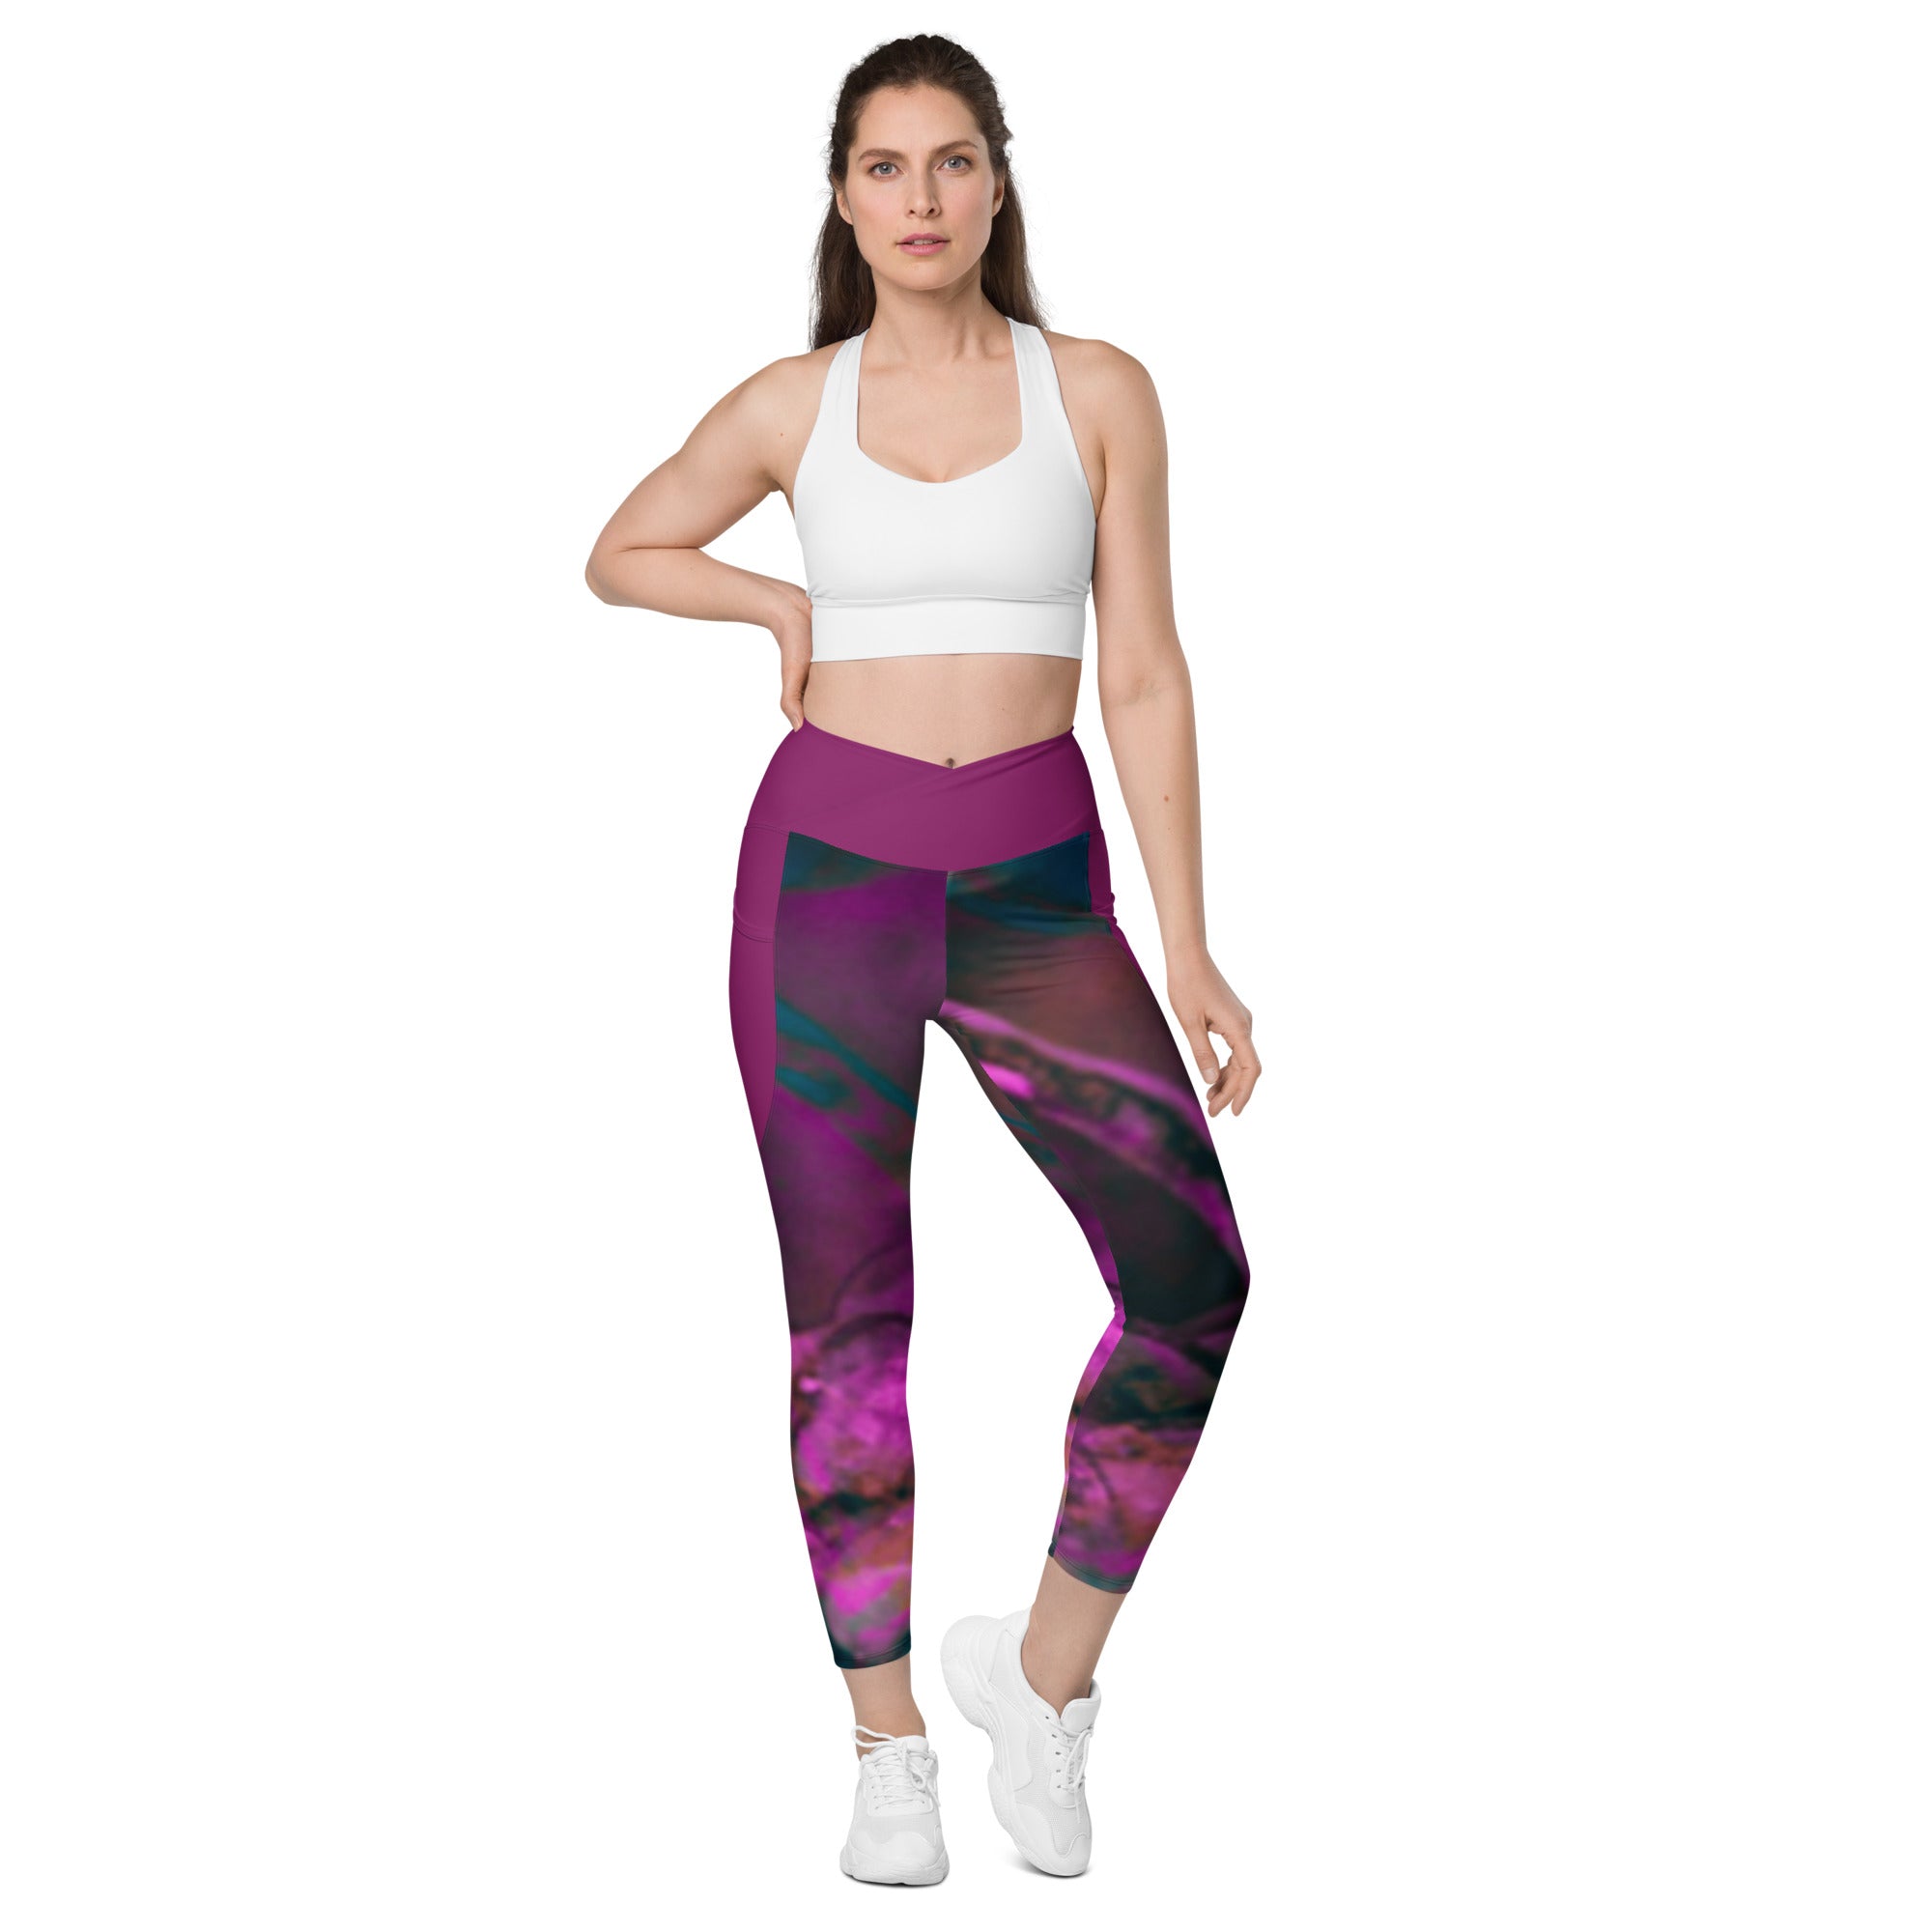 Rise Crossover leggings with pockets